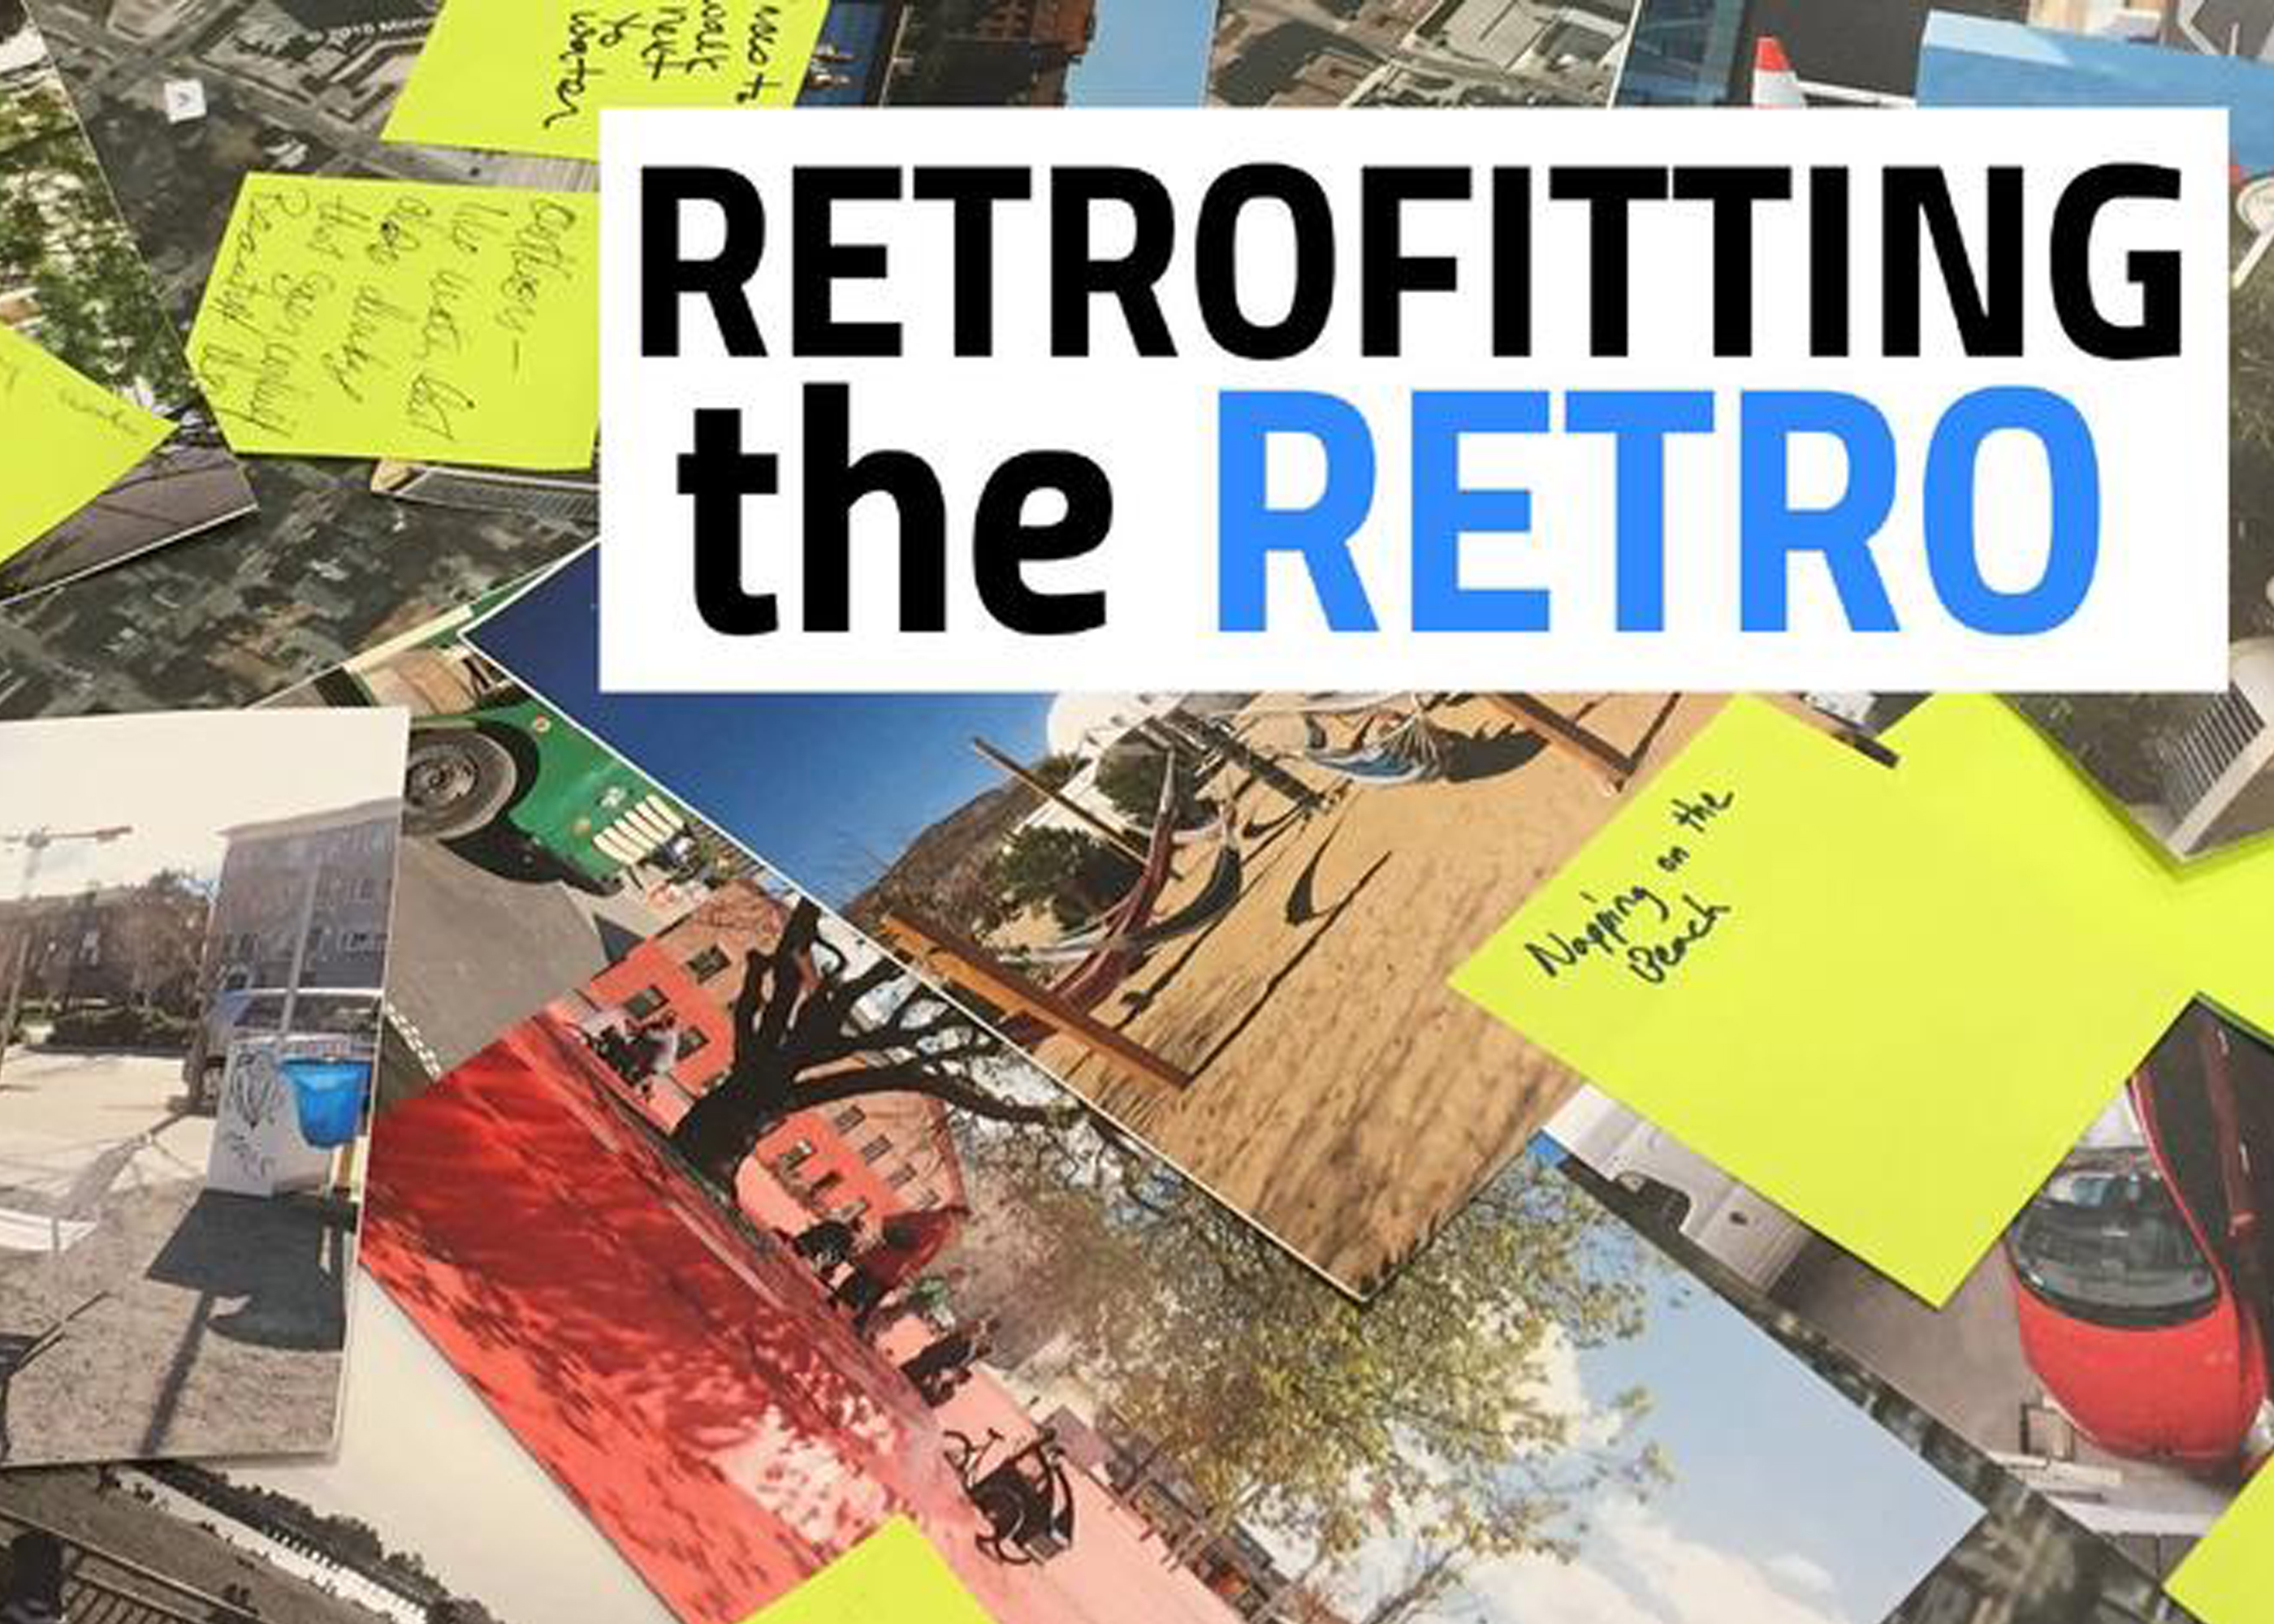 Image of post-its and other forms of idea generating with the words Retrofitting the Retro 